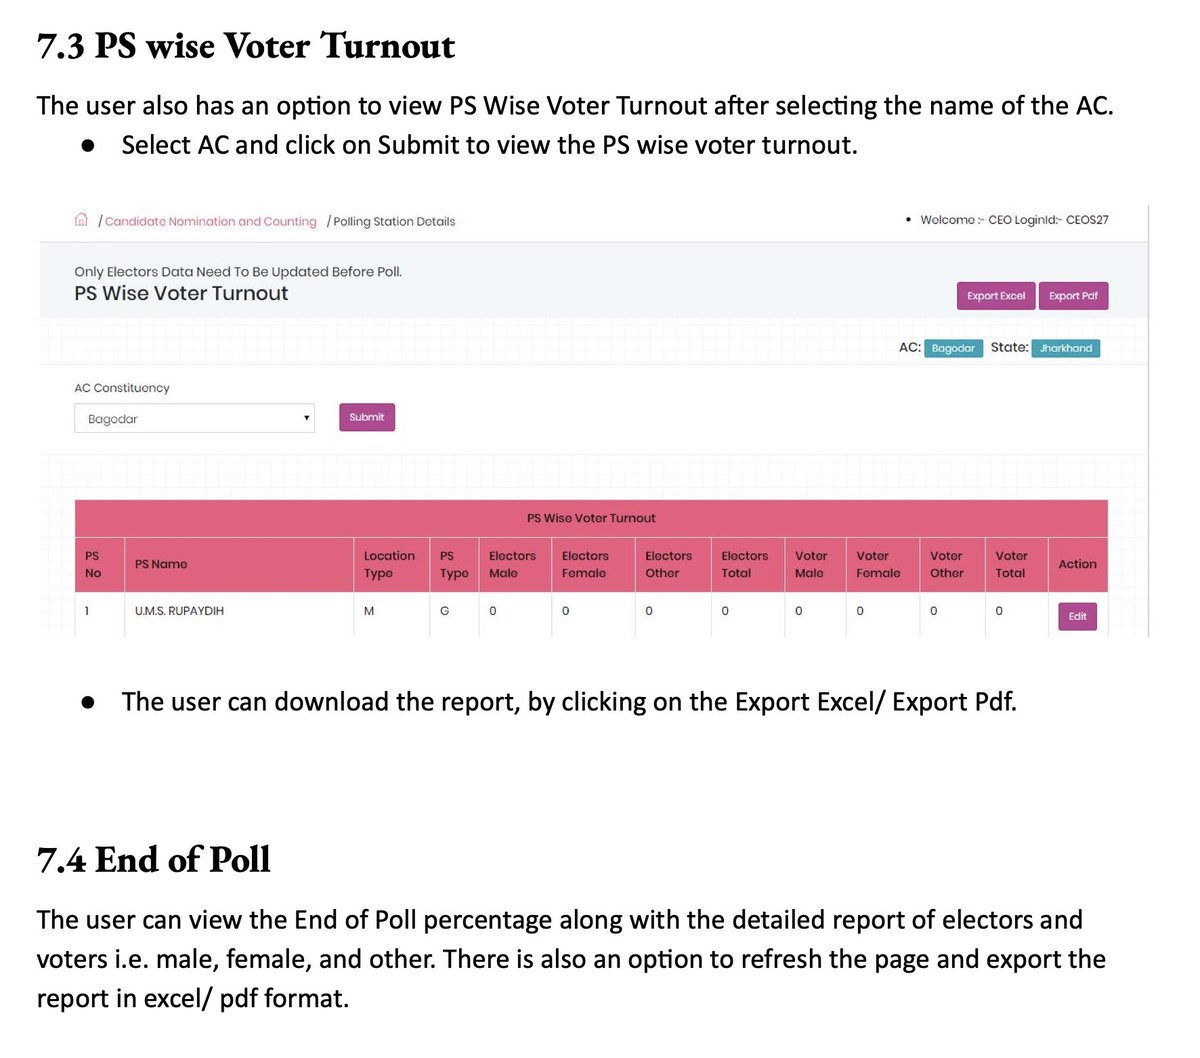 Dear @ECISVEEP, Why this reluctance to share 17C or PS-wise voter turnout data? It is a simple click away on the ENCORE application! Transparency is the foundation of trust. Secrecy sows the seeds of suspicion.